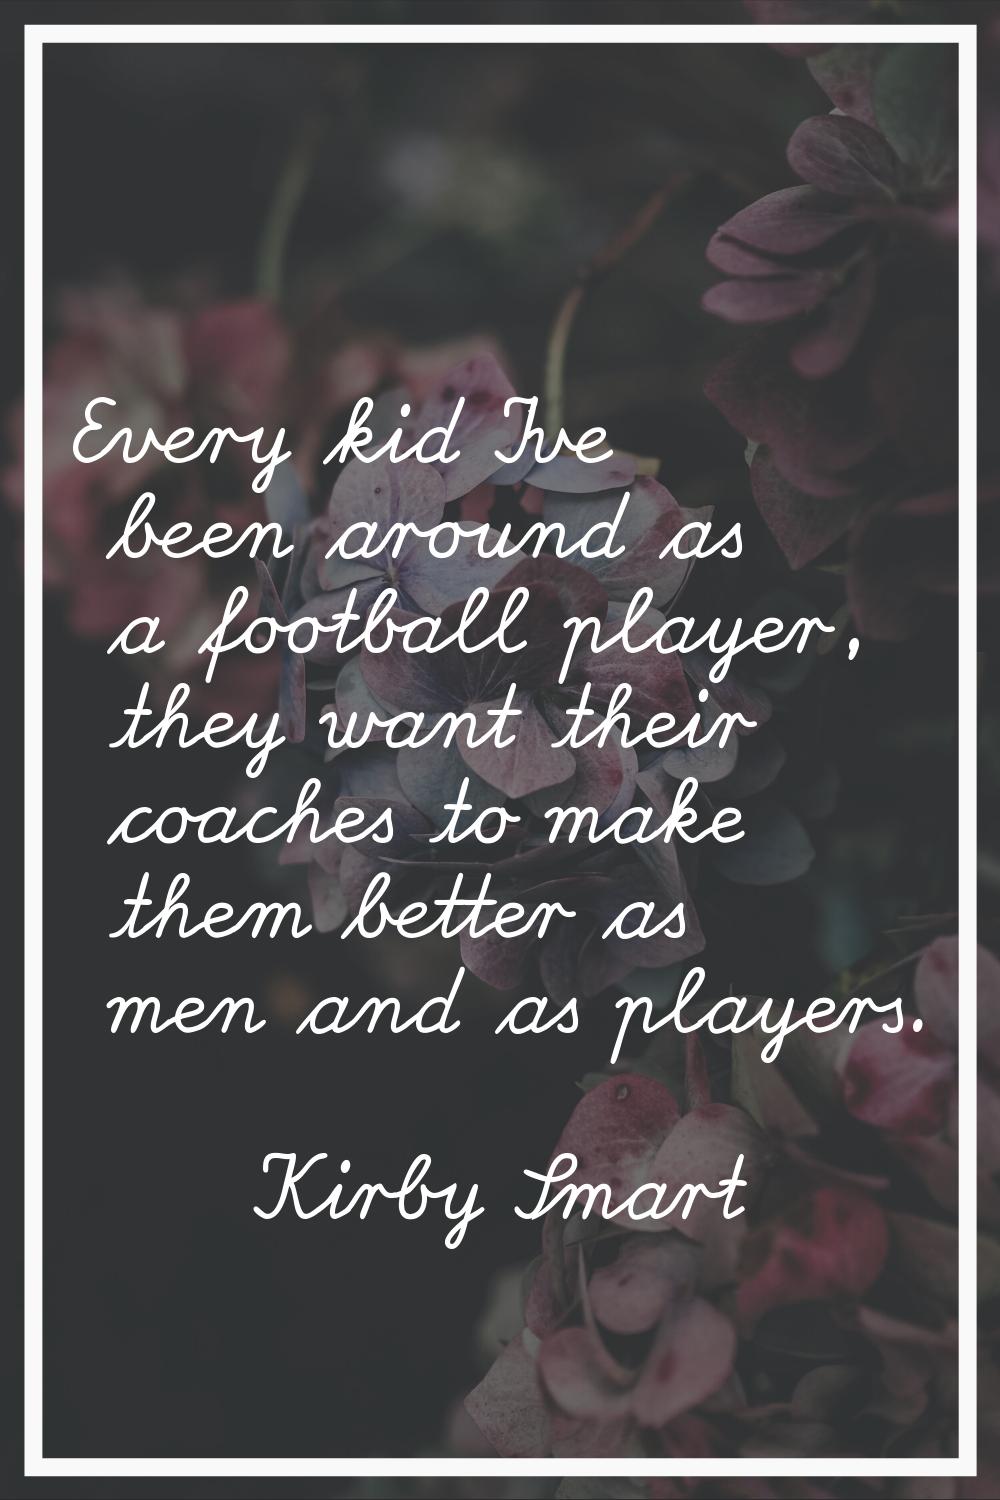 Every kid I've been around as a football player, they want their coaches to make them better as men